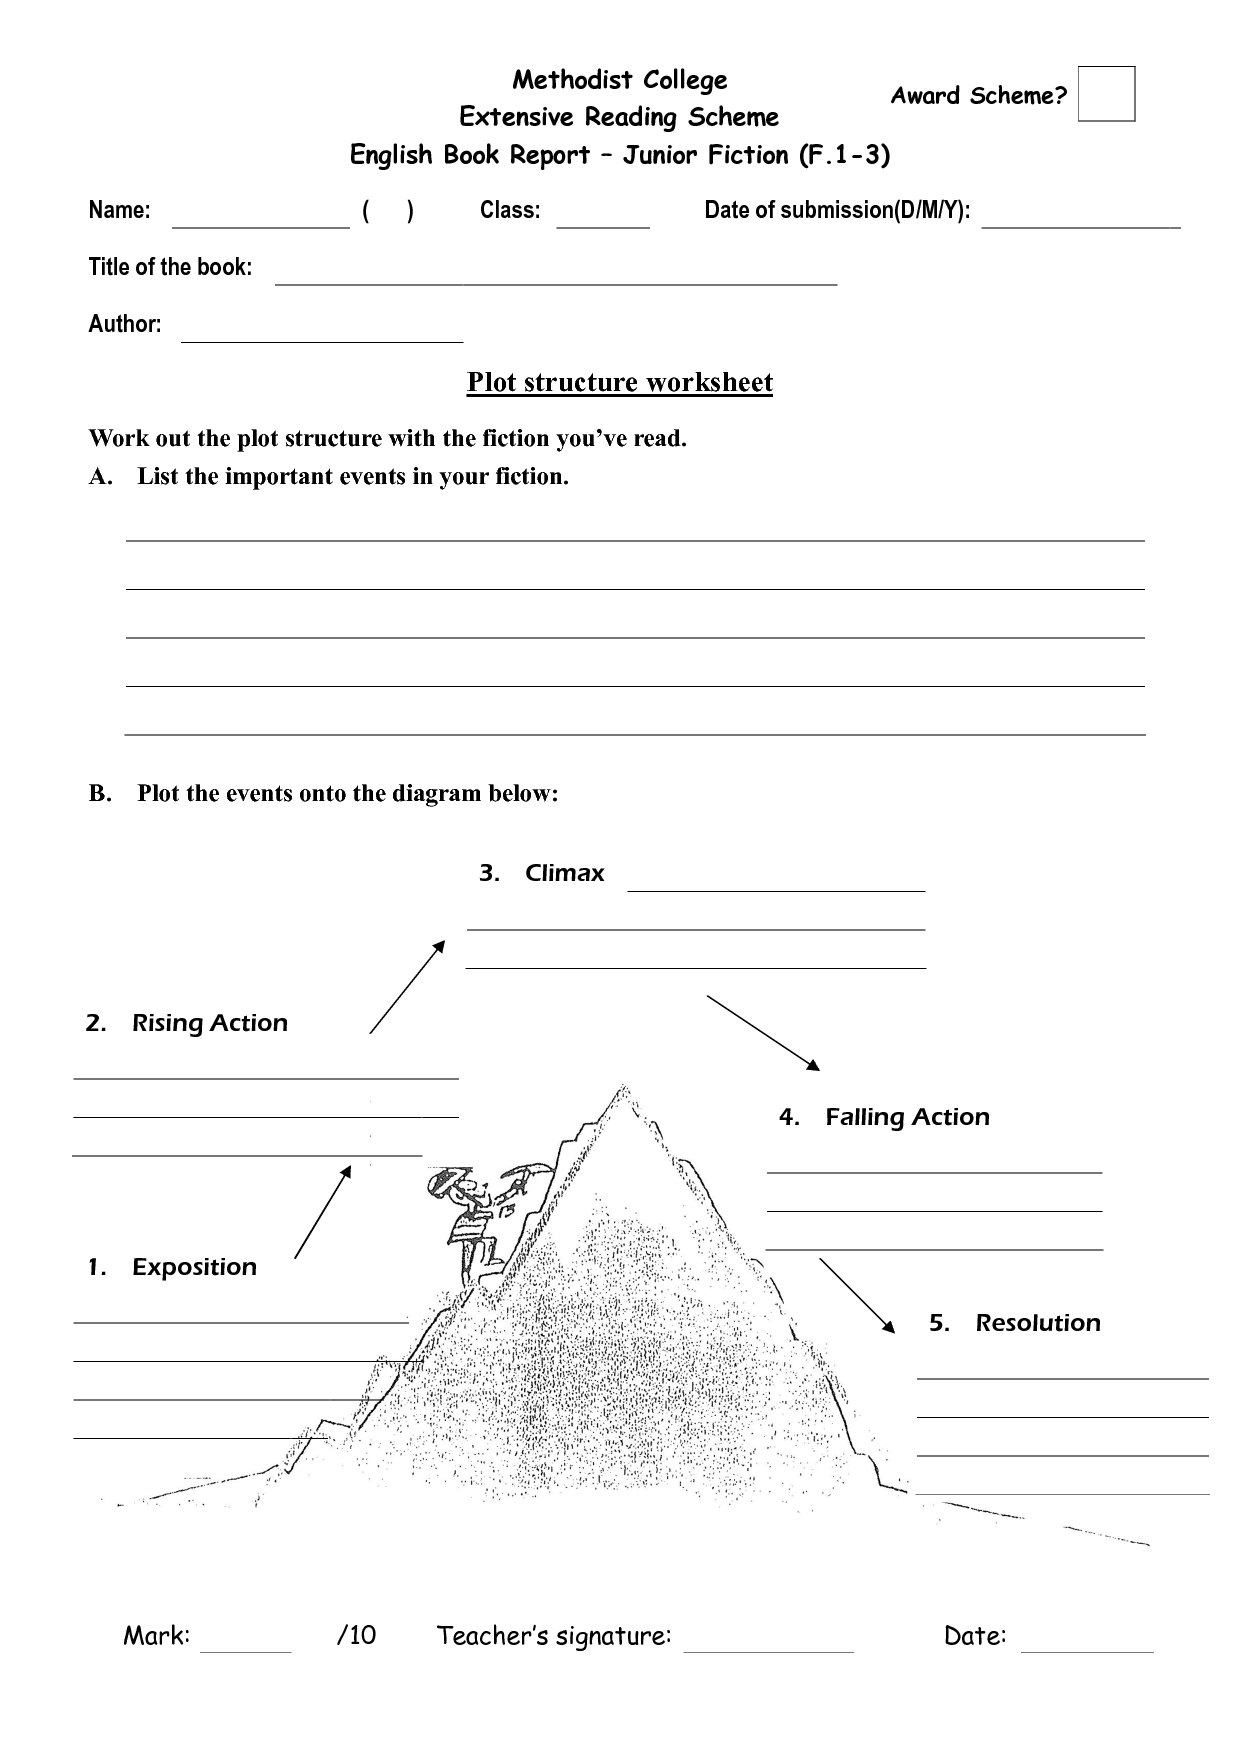 15-best-images-of-story-structure-worksheet-story-plot-worksheets-4th-grade-plot-structure